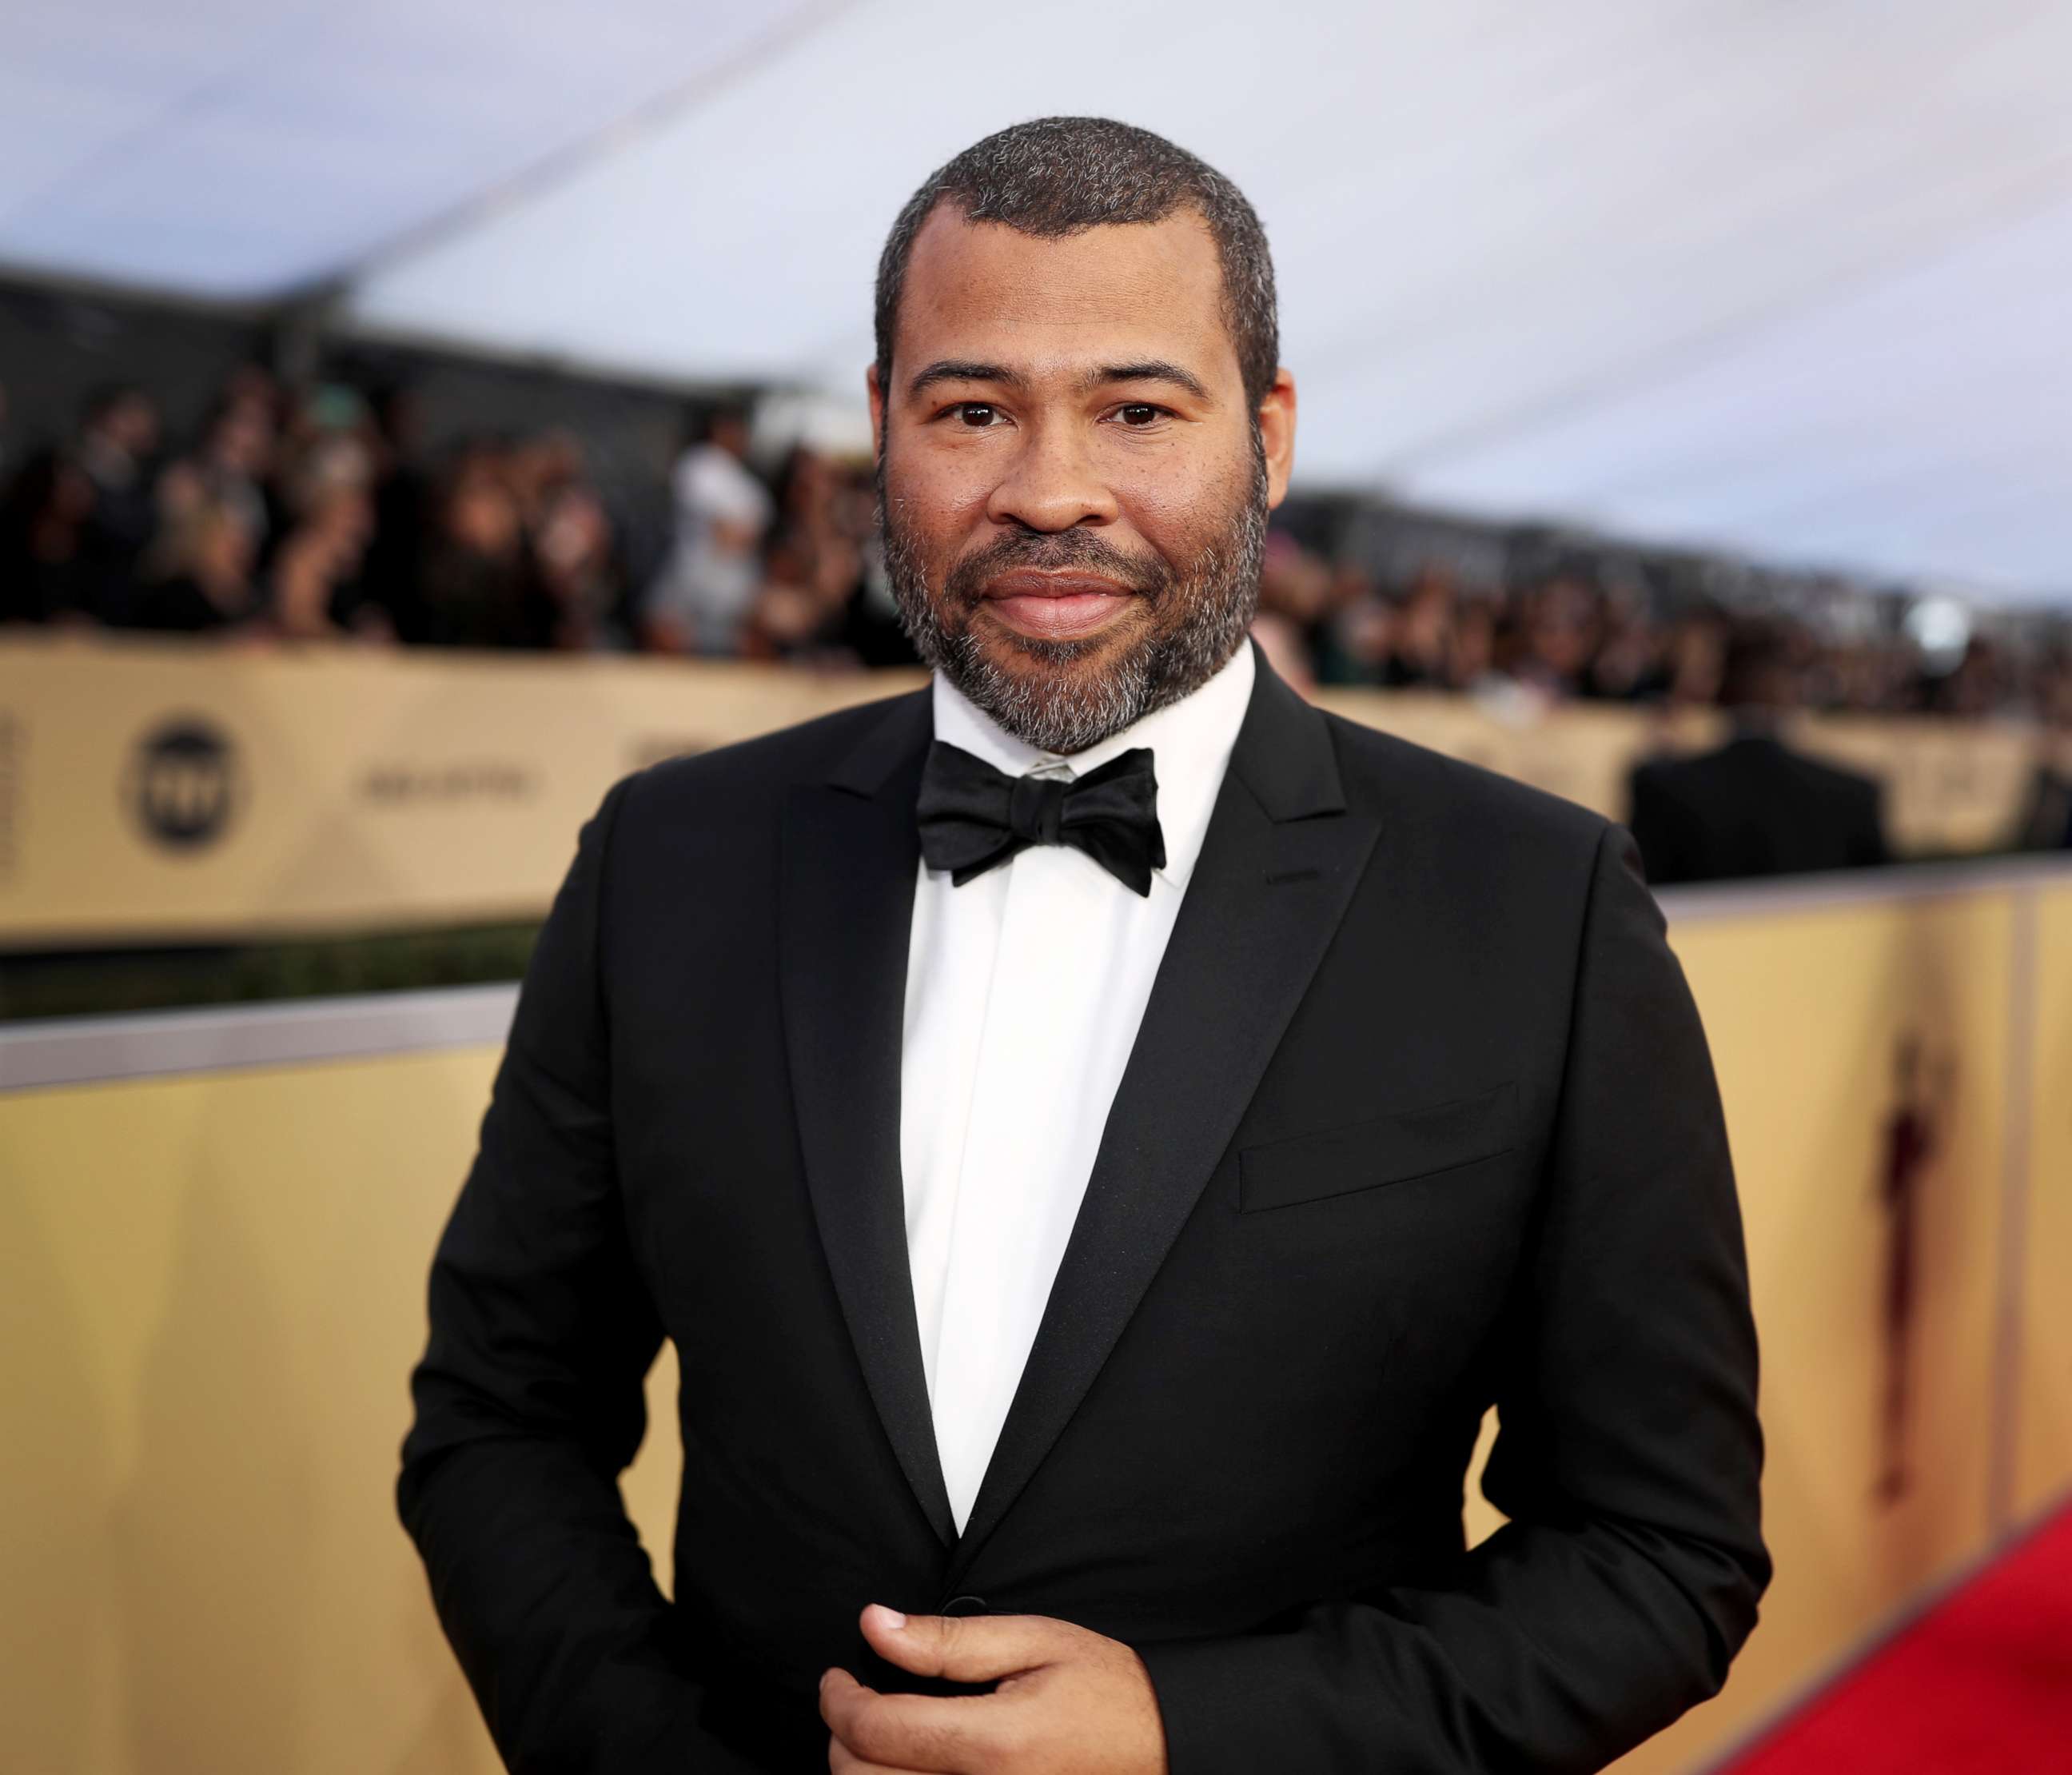 PHOTO: Jordan Peele attends the 24th annual Screen Actors Guild Awards at the Shrine Auditorium, Jan. 21, 2018, in Los Angeles.